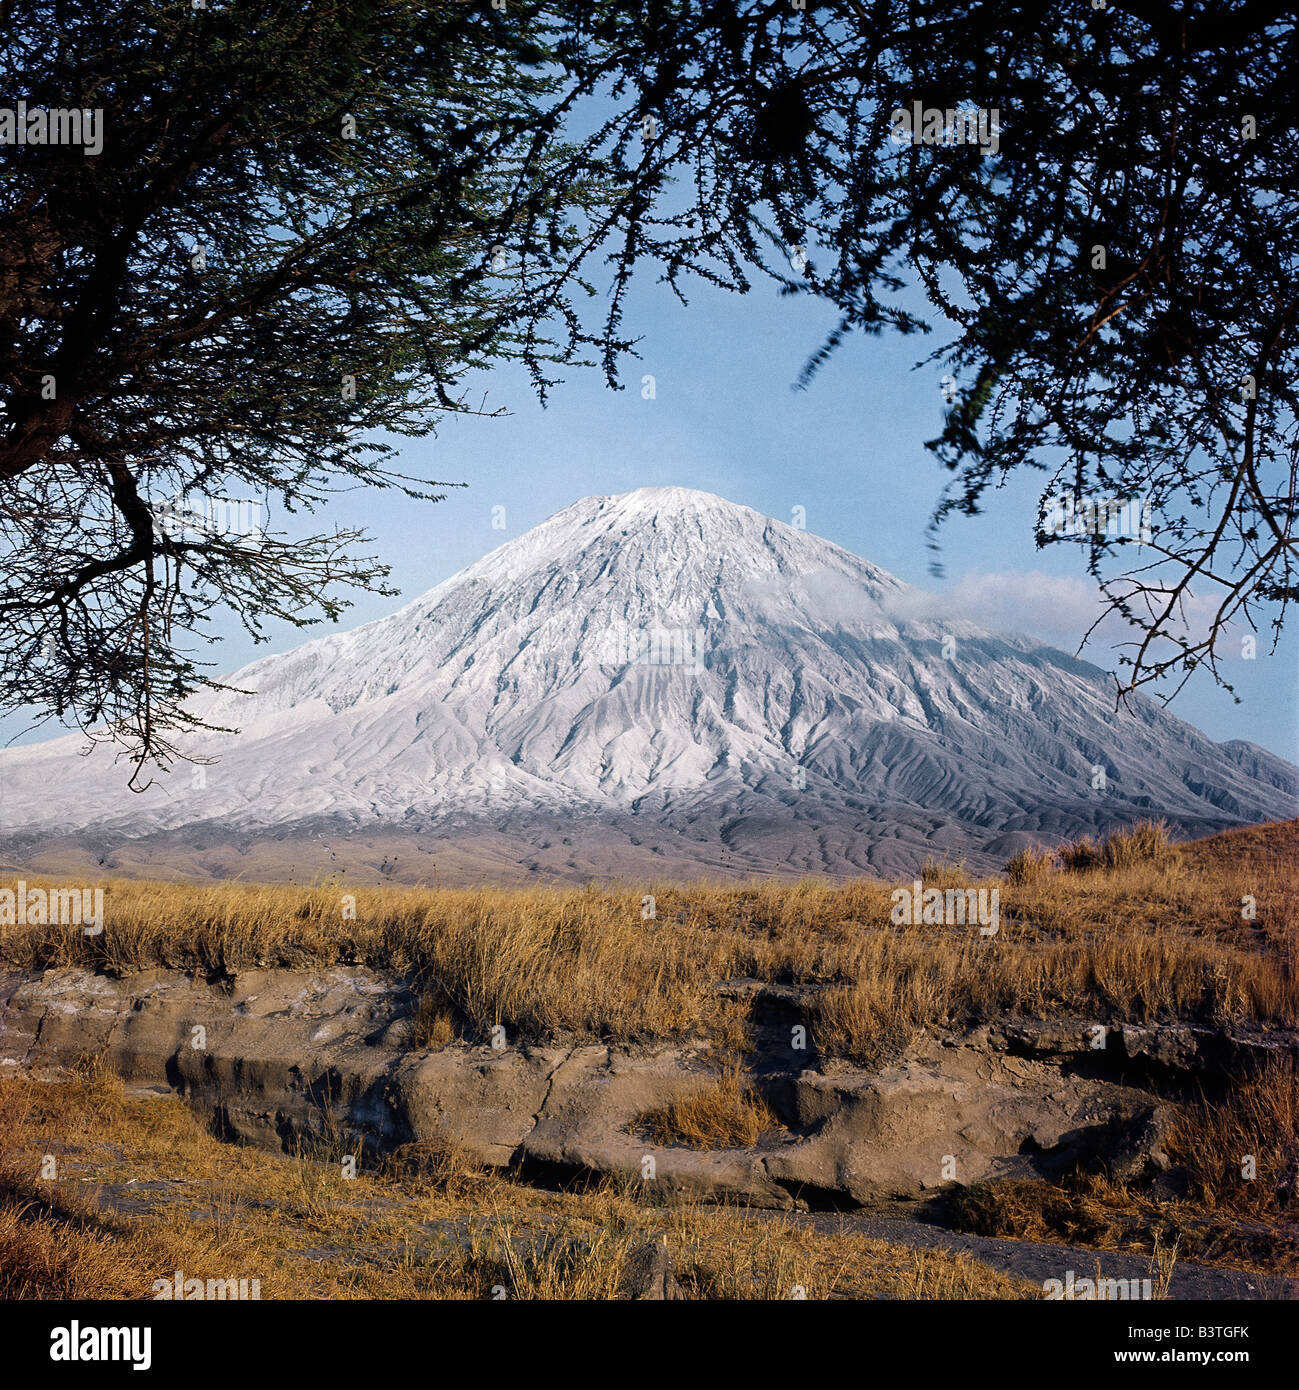 Tanzania, Northern Tanzania, Ol doinyo Lengai, the Maasai's 'Mountain of God', is the only active volcano in the Gregory Rift - an important section of the eastern branch of Africa's Great Rift Valley. It still discharges rare carbonatite lavas, which turn white on exposure to air.This photograph was taken in 1966 when the last major explosive eruption took place, mantling the volcano's flanks with fine ash. Stock Photo